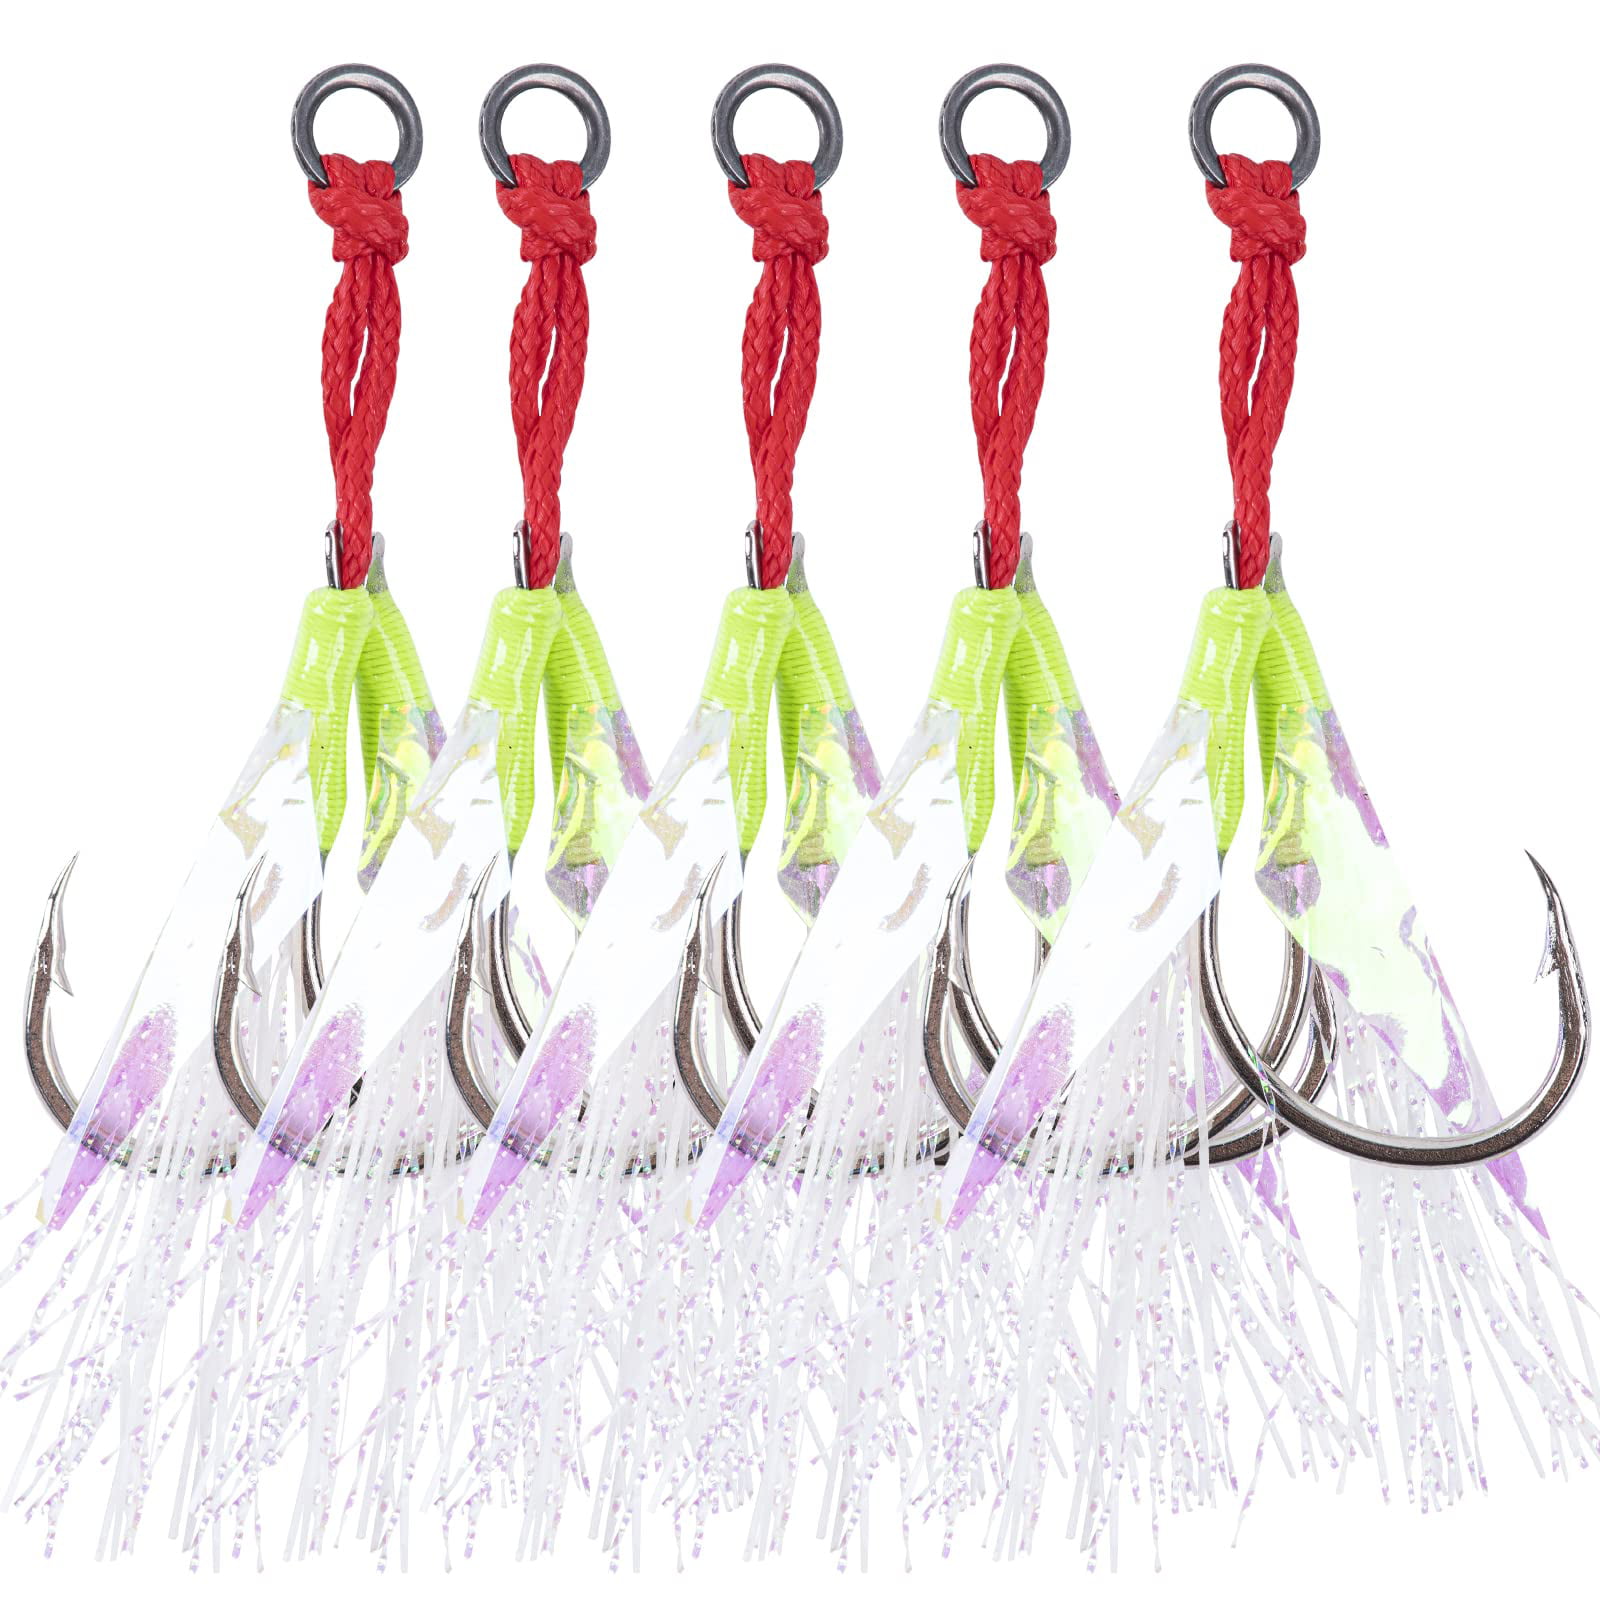 Goture Double Fishing Assist Hooks Kit Jig Assist Glow Hook Slow Fast Fall  Jigs Fishing Hook for Lead Vertical Jigging Lures Pack of 5 